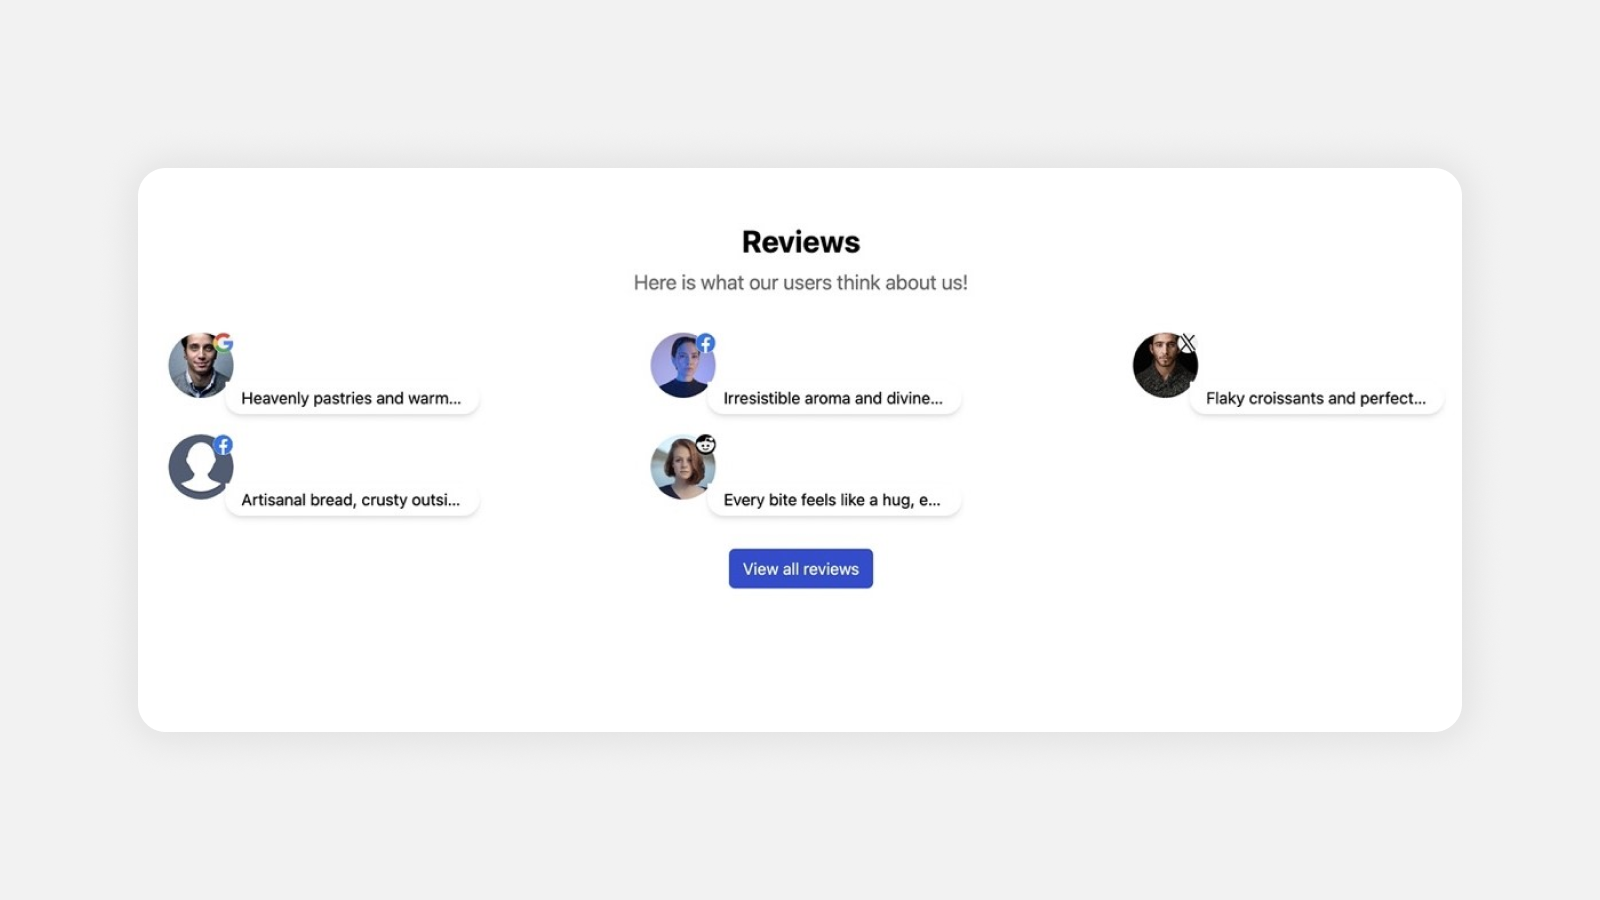 New Variant of the Reviews Component